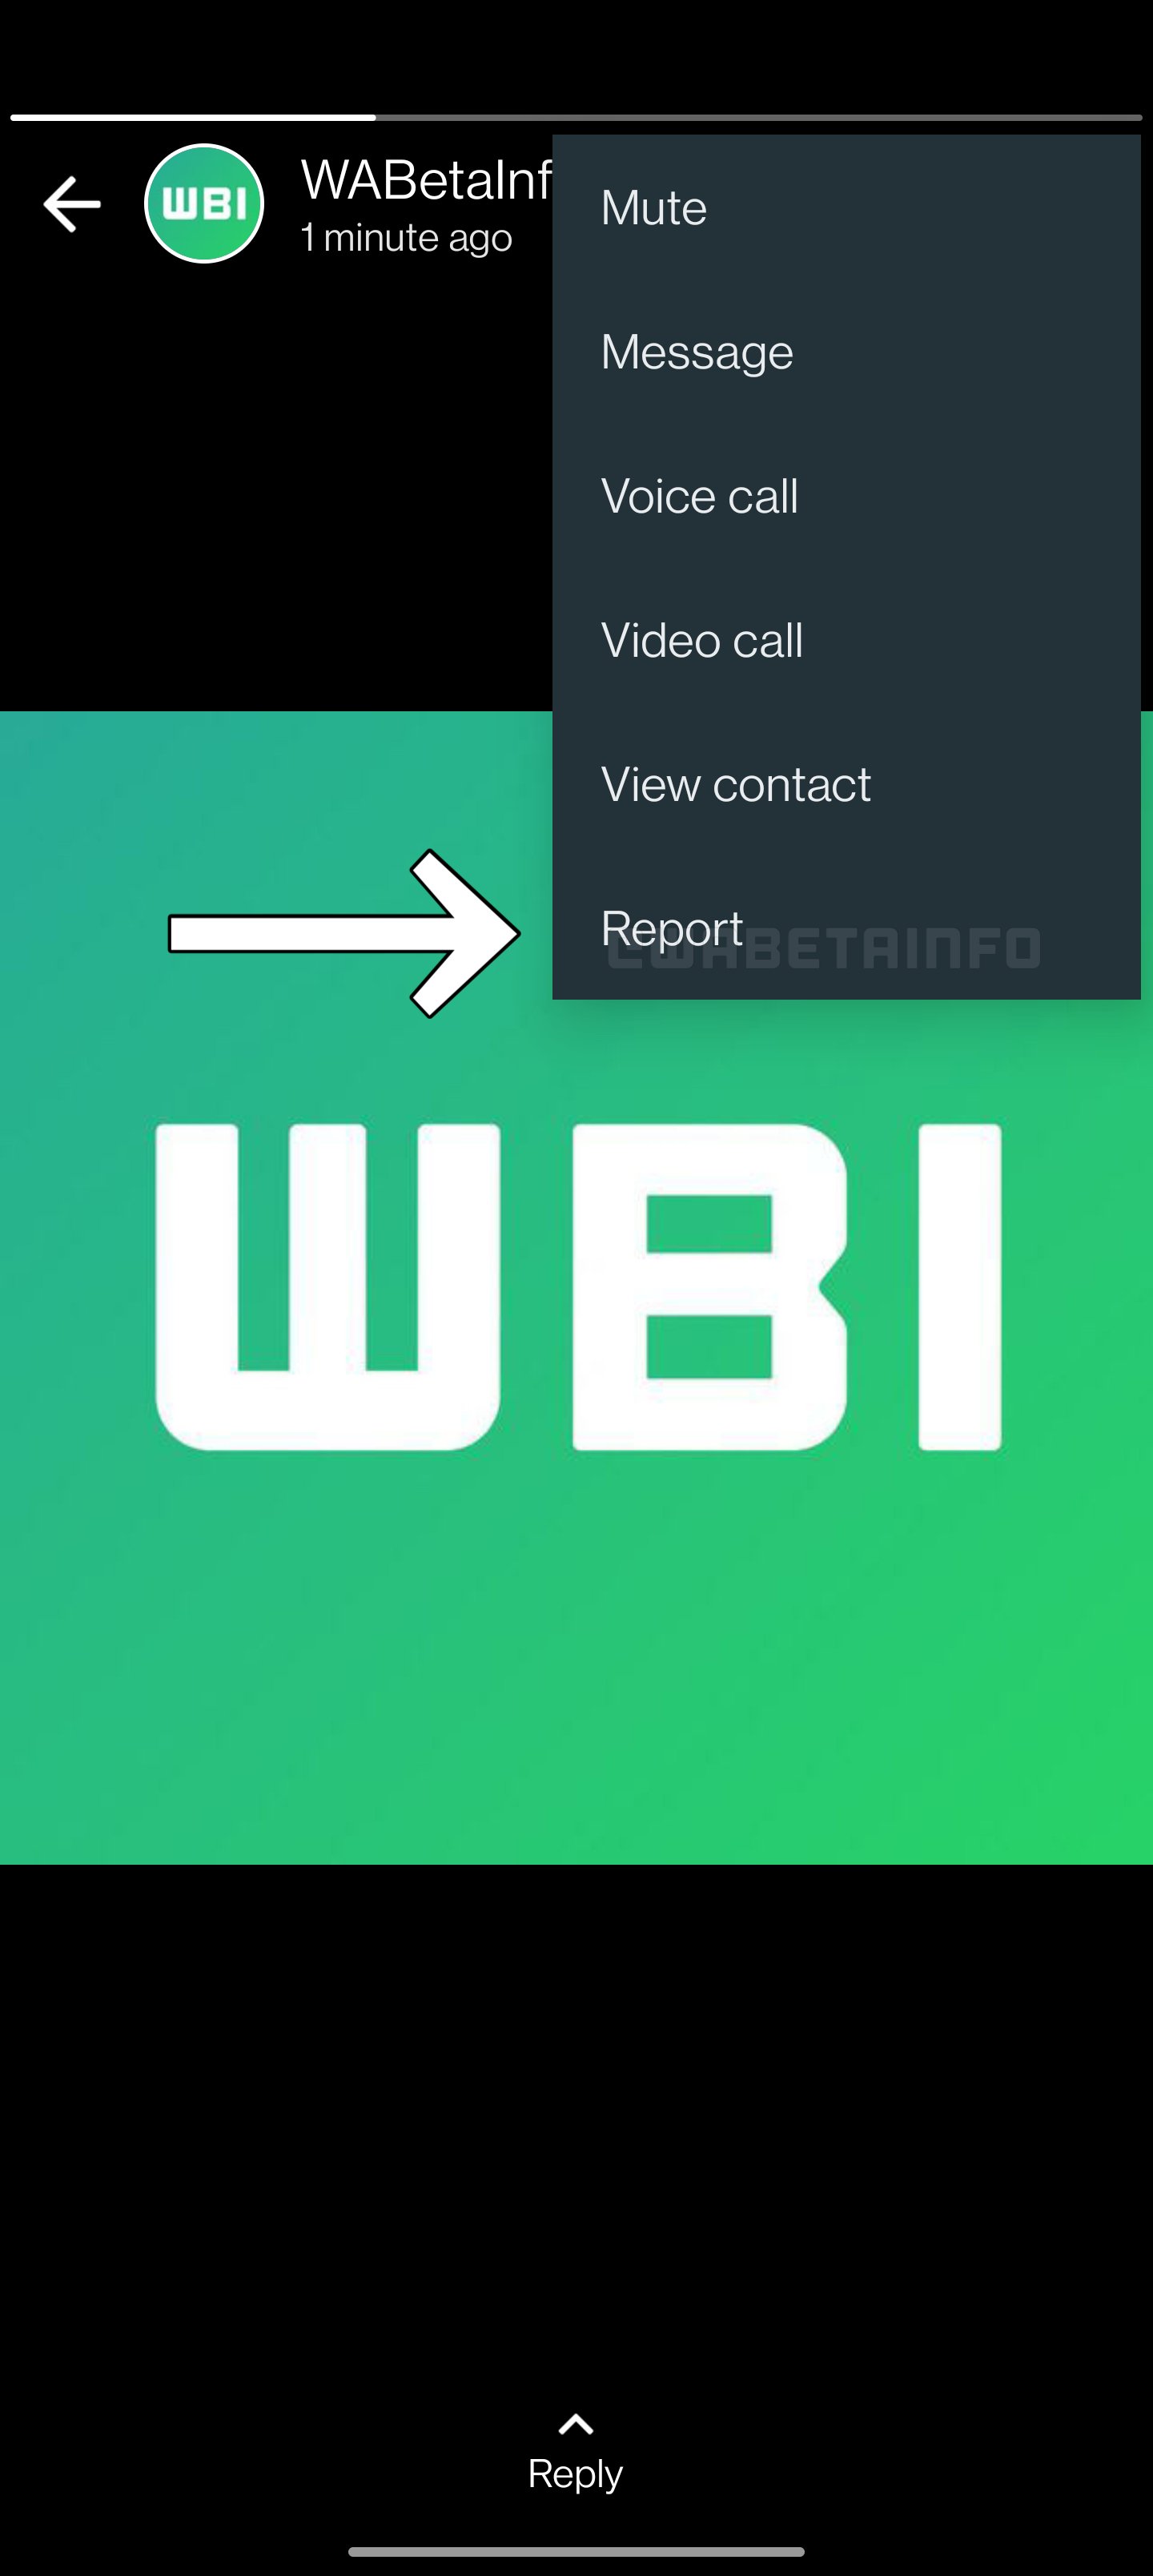 A visual representation of the latest feature.—WABetainfo